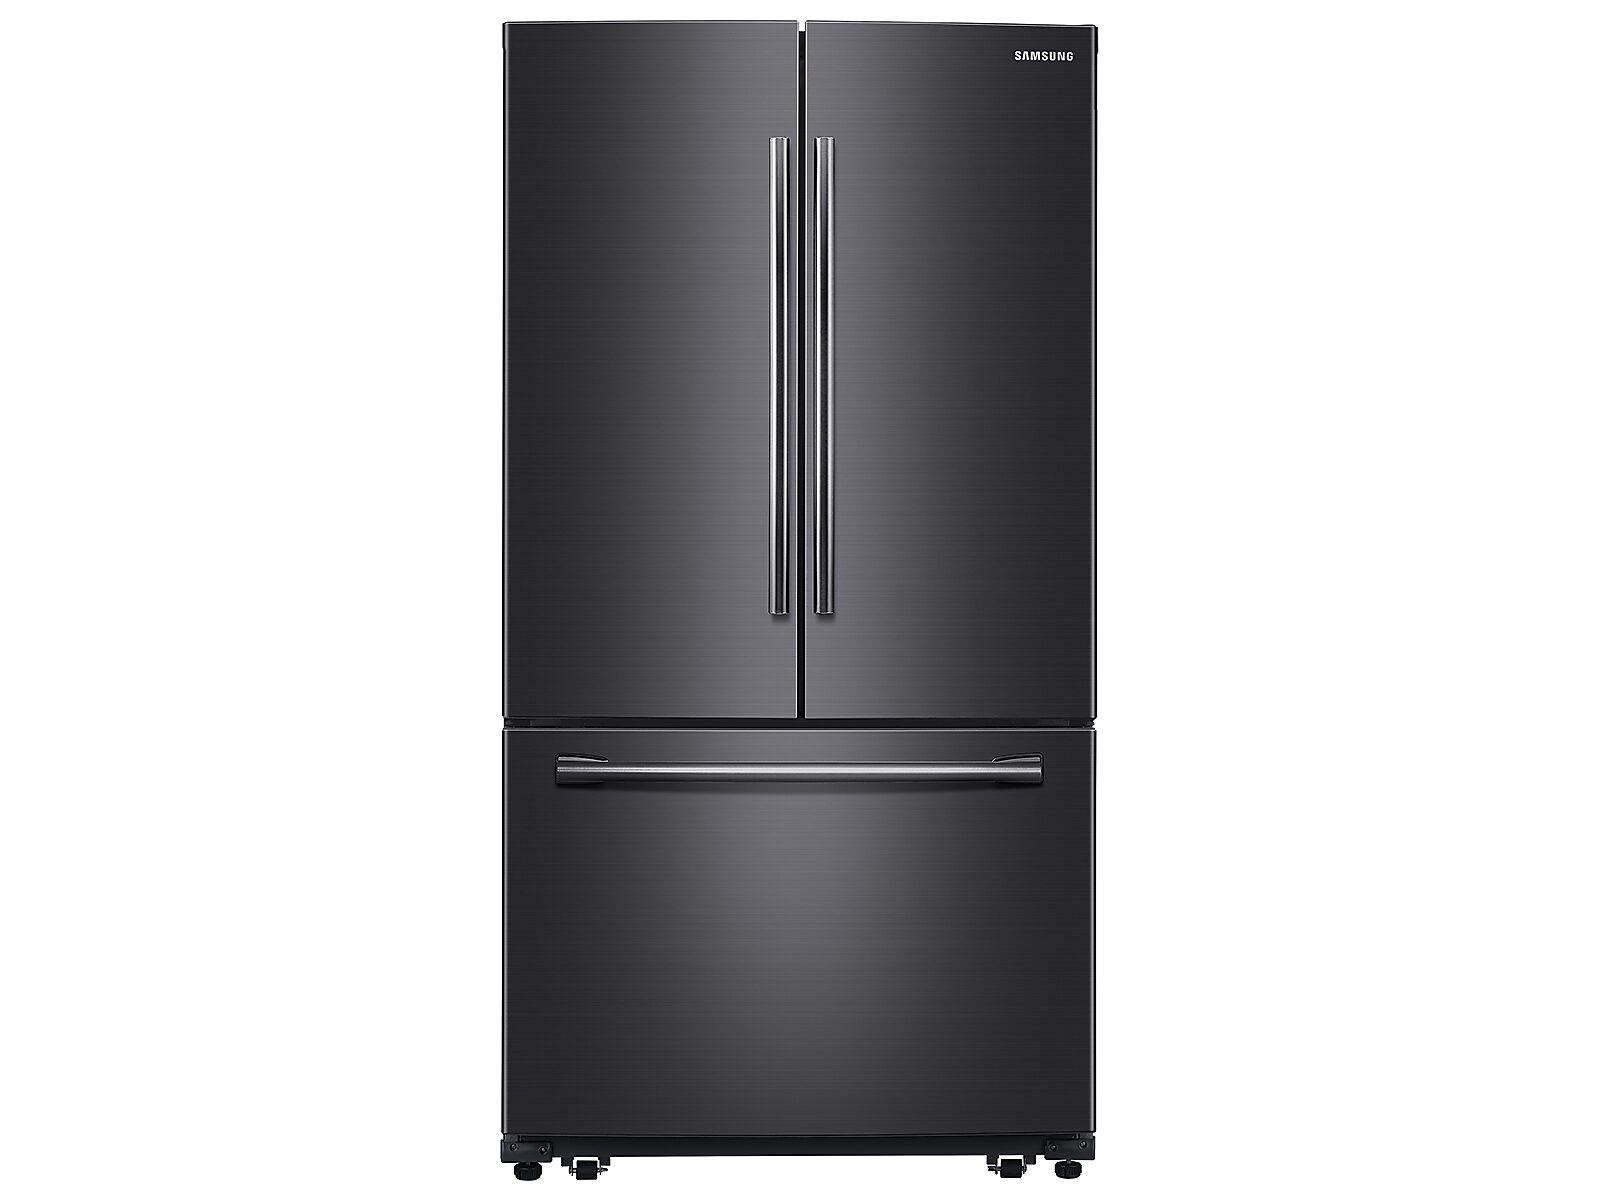 Samsung 26 cu. ft. French Door Refrigerator with Filtered Ice Maker in Black Stainless Steel(RF260BEAESG/AA) photo